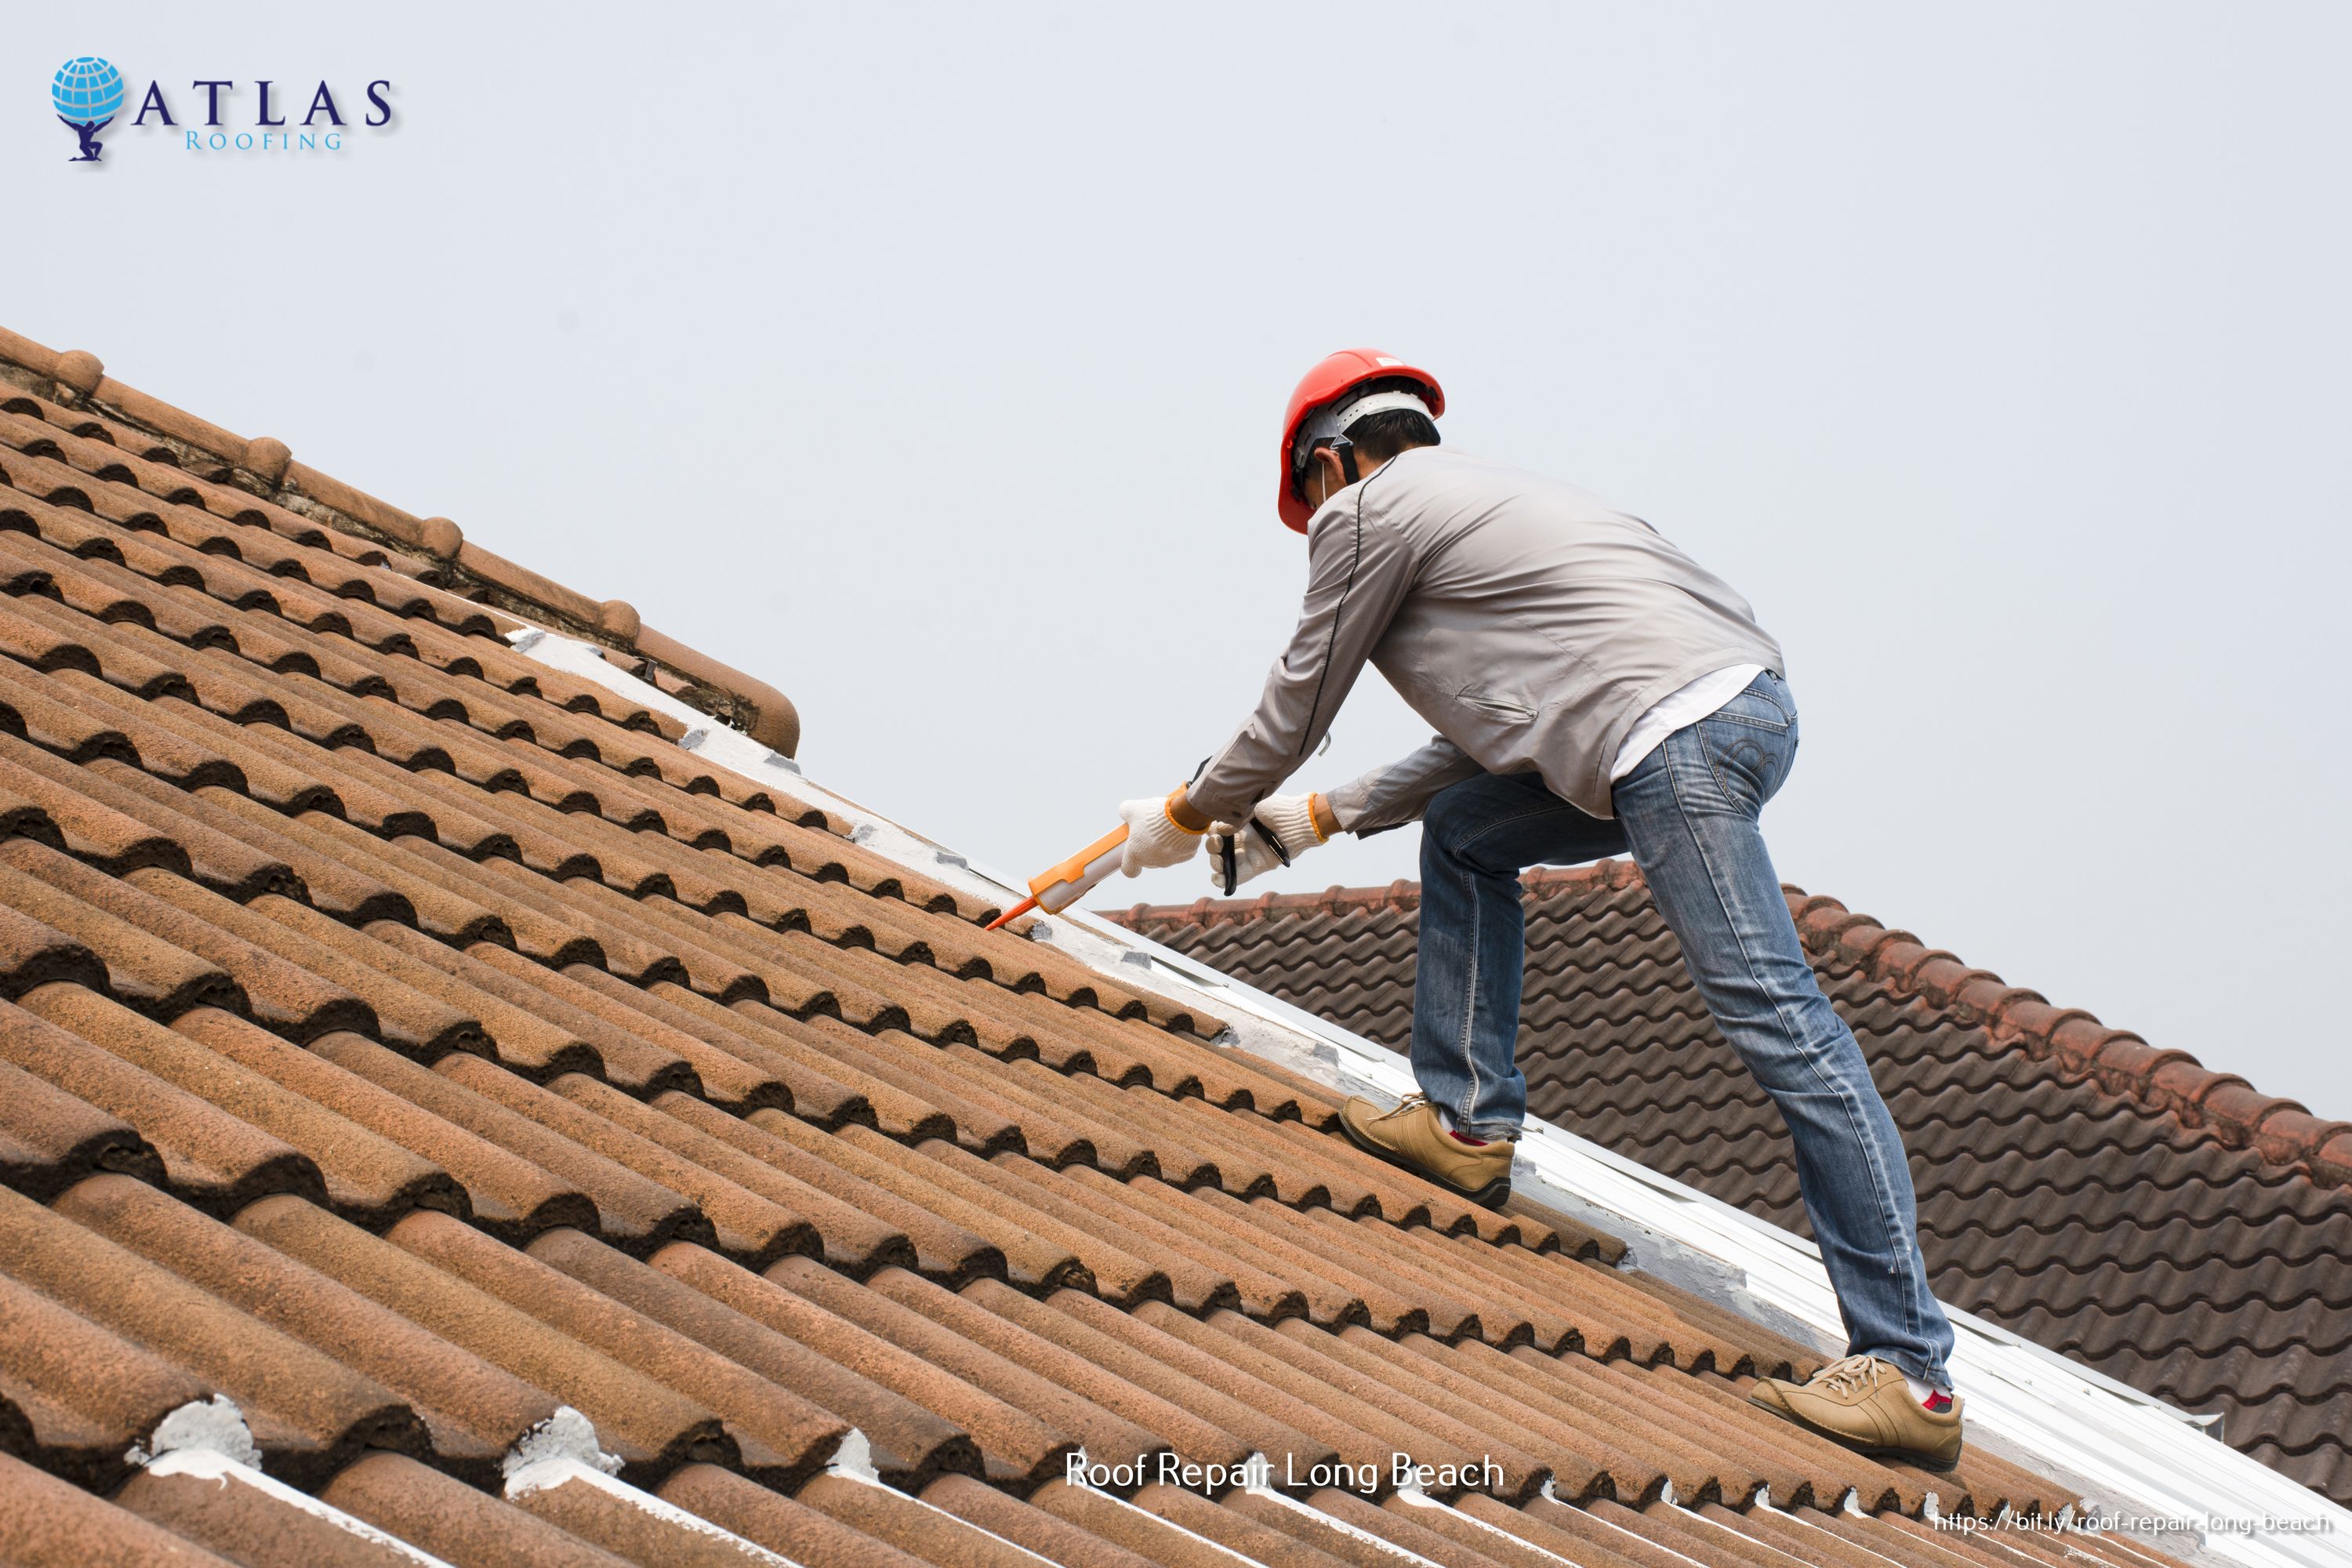 Atlas Roofing of Long Beach Highlights the Services Offered by Professional Roofers